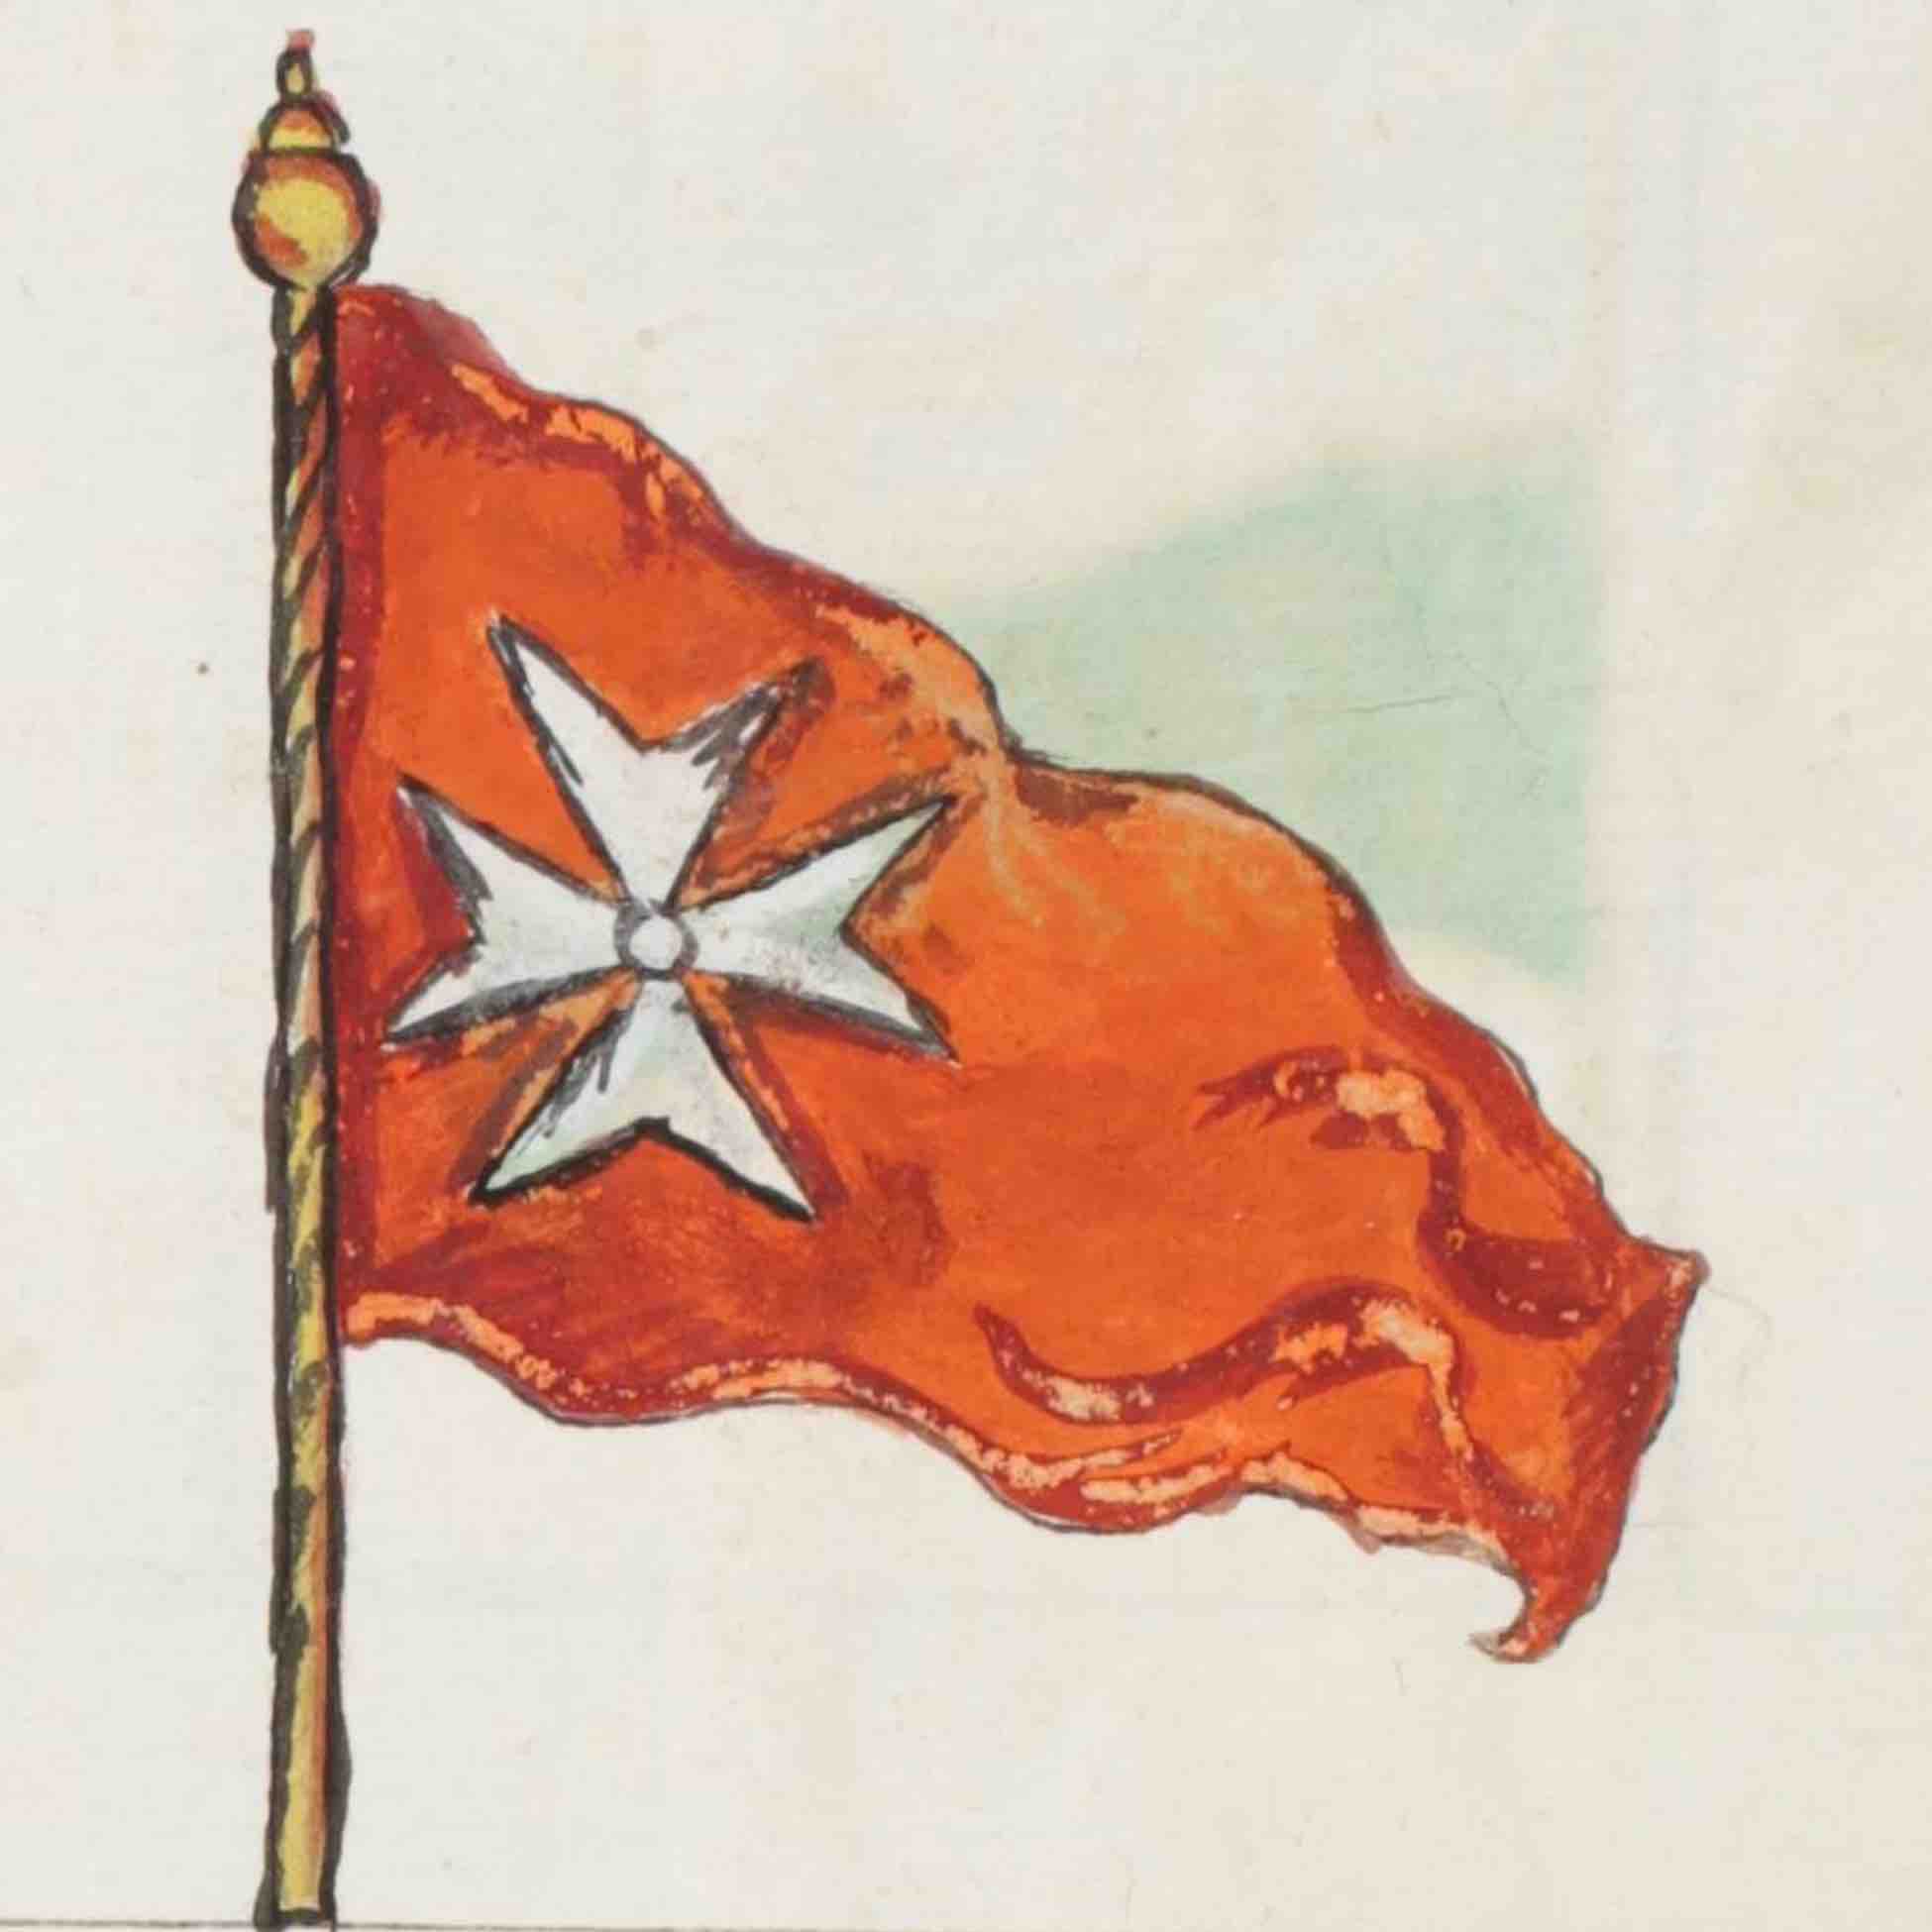 Pennant of the Grand Master, Catholic University of America. (<a href='https://w3id.org/vhmml/readingRoom/view/500329'>CUAMAL 00001</a>)